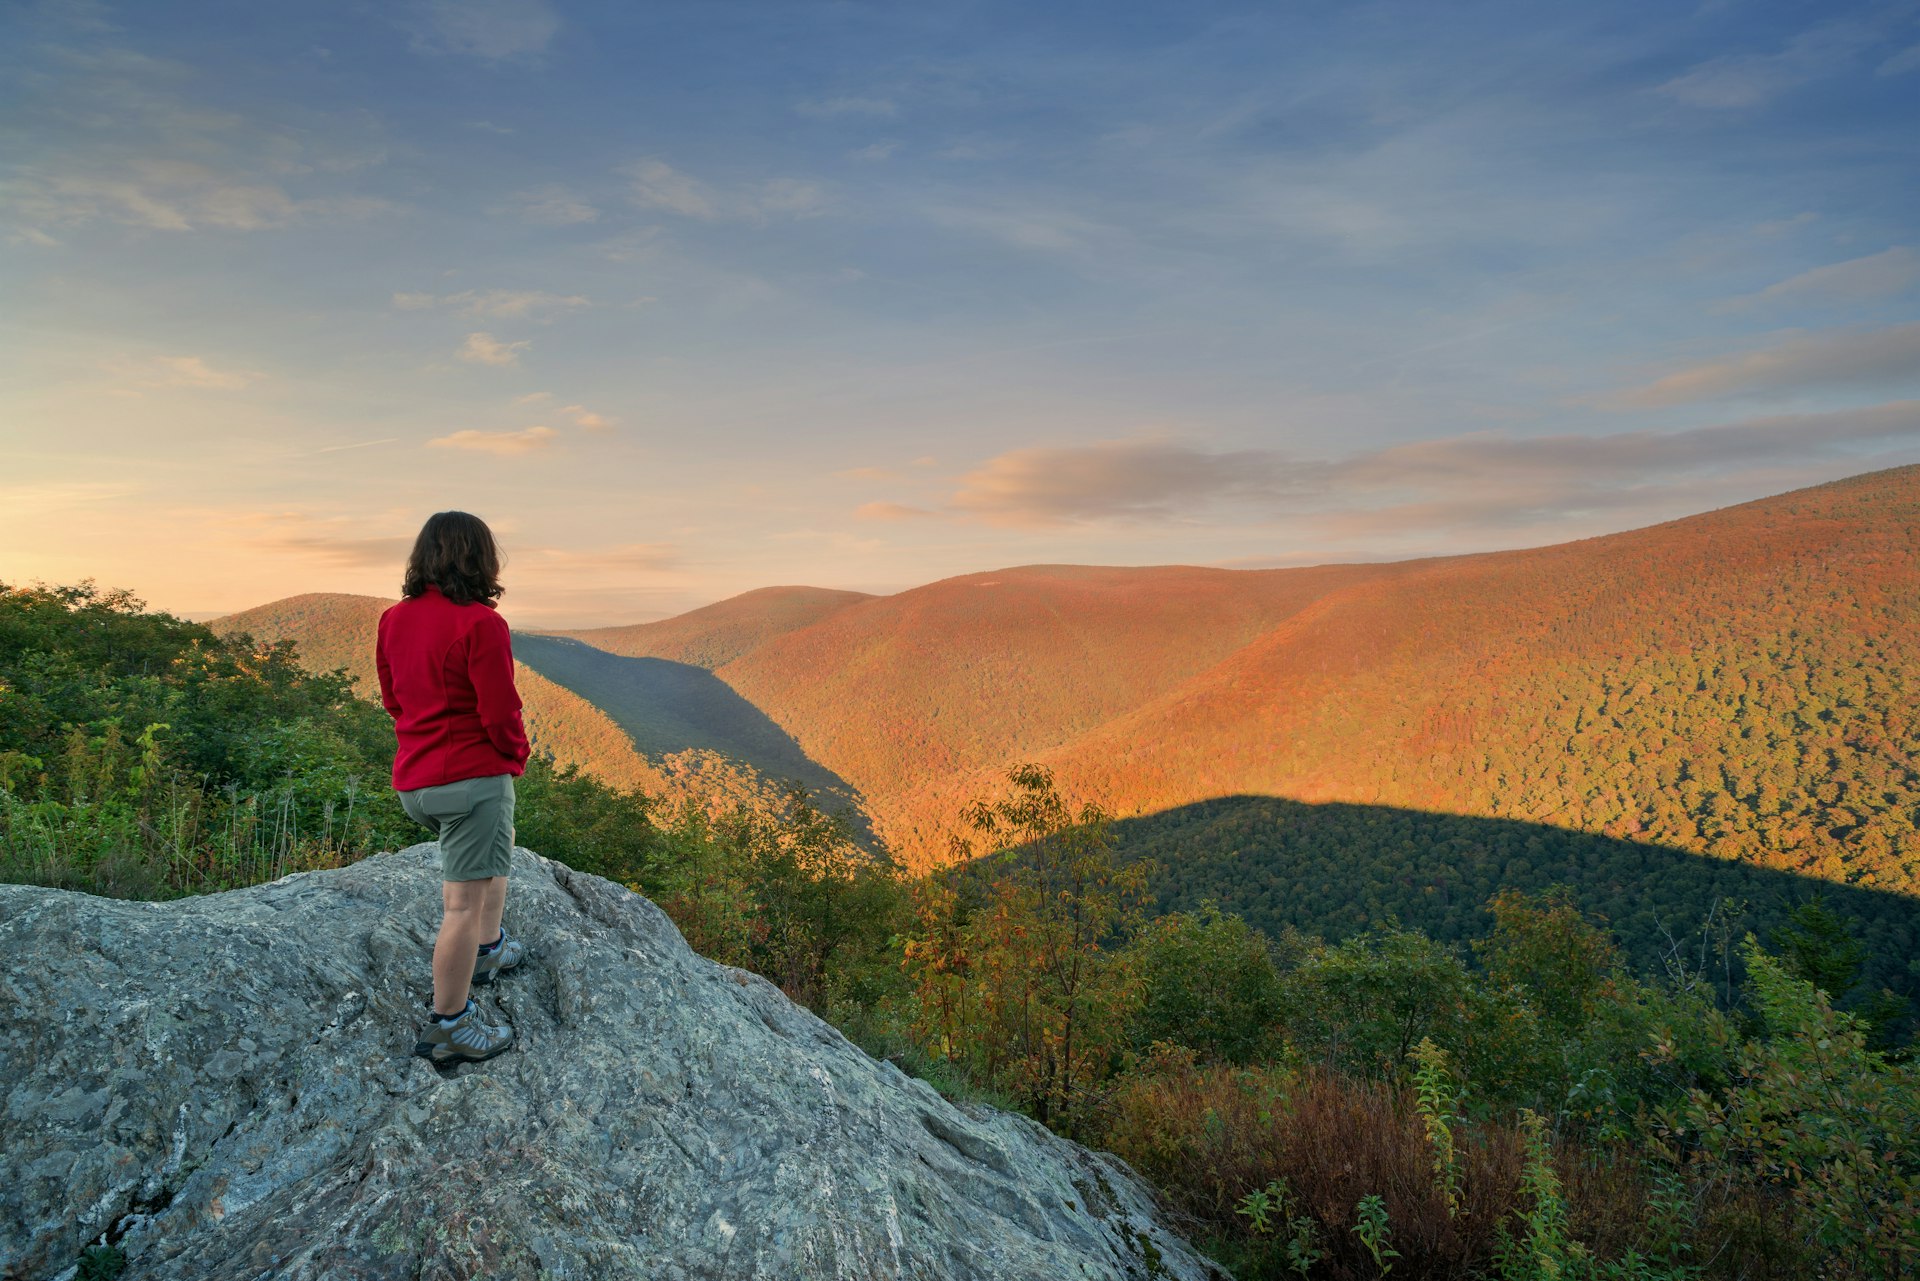 A hiker is standing on a large rock looking out over a mountainous landscape that's covered in trees with fall foliage